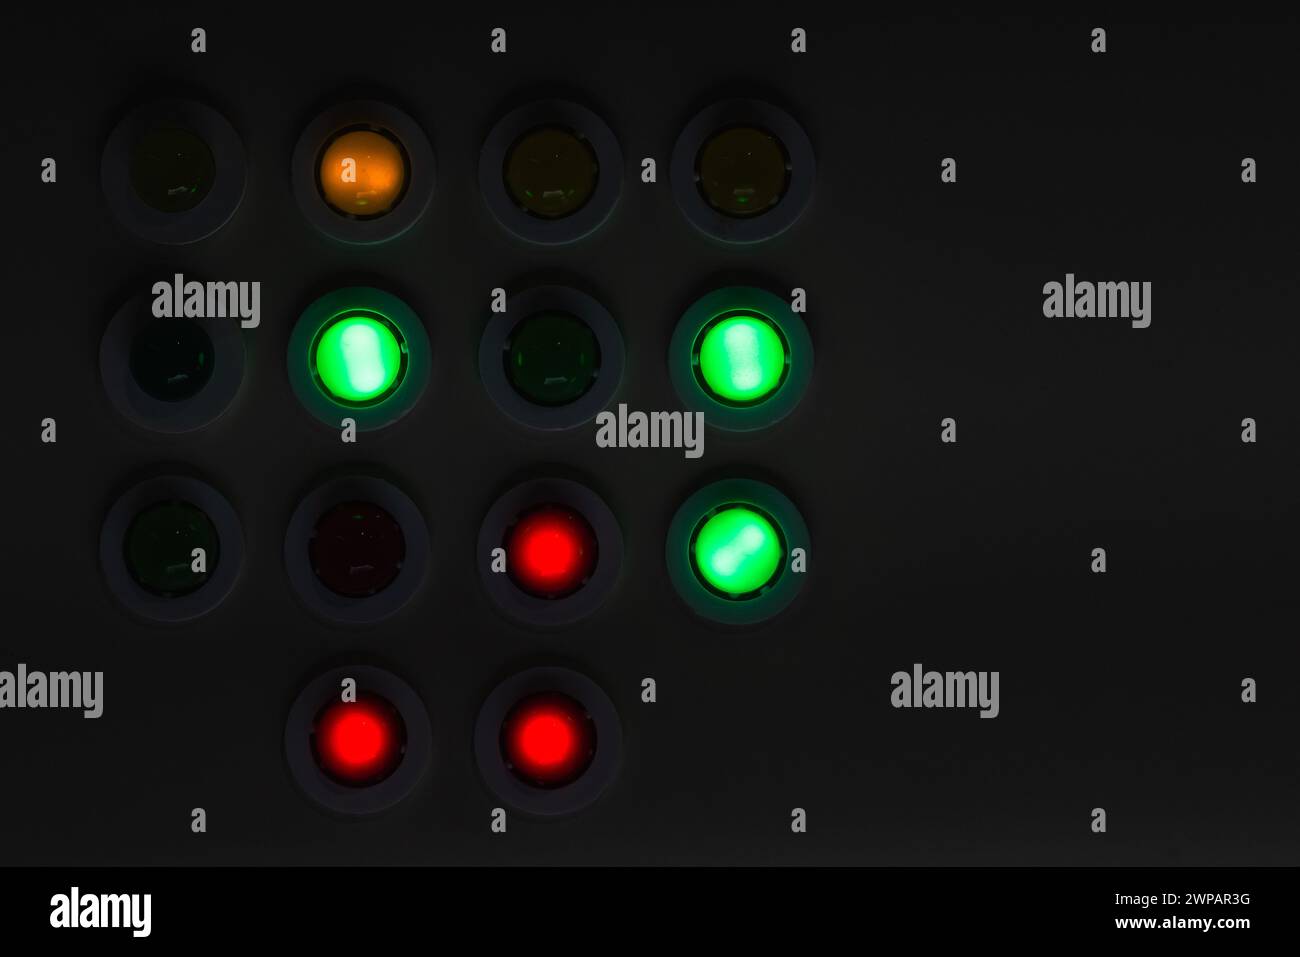 Dark industrial control panel with colorful illuminated buttons at night Stock Photo